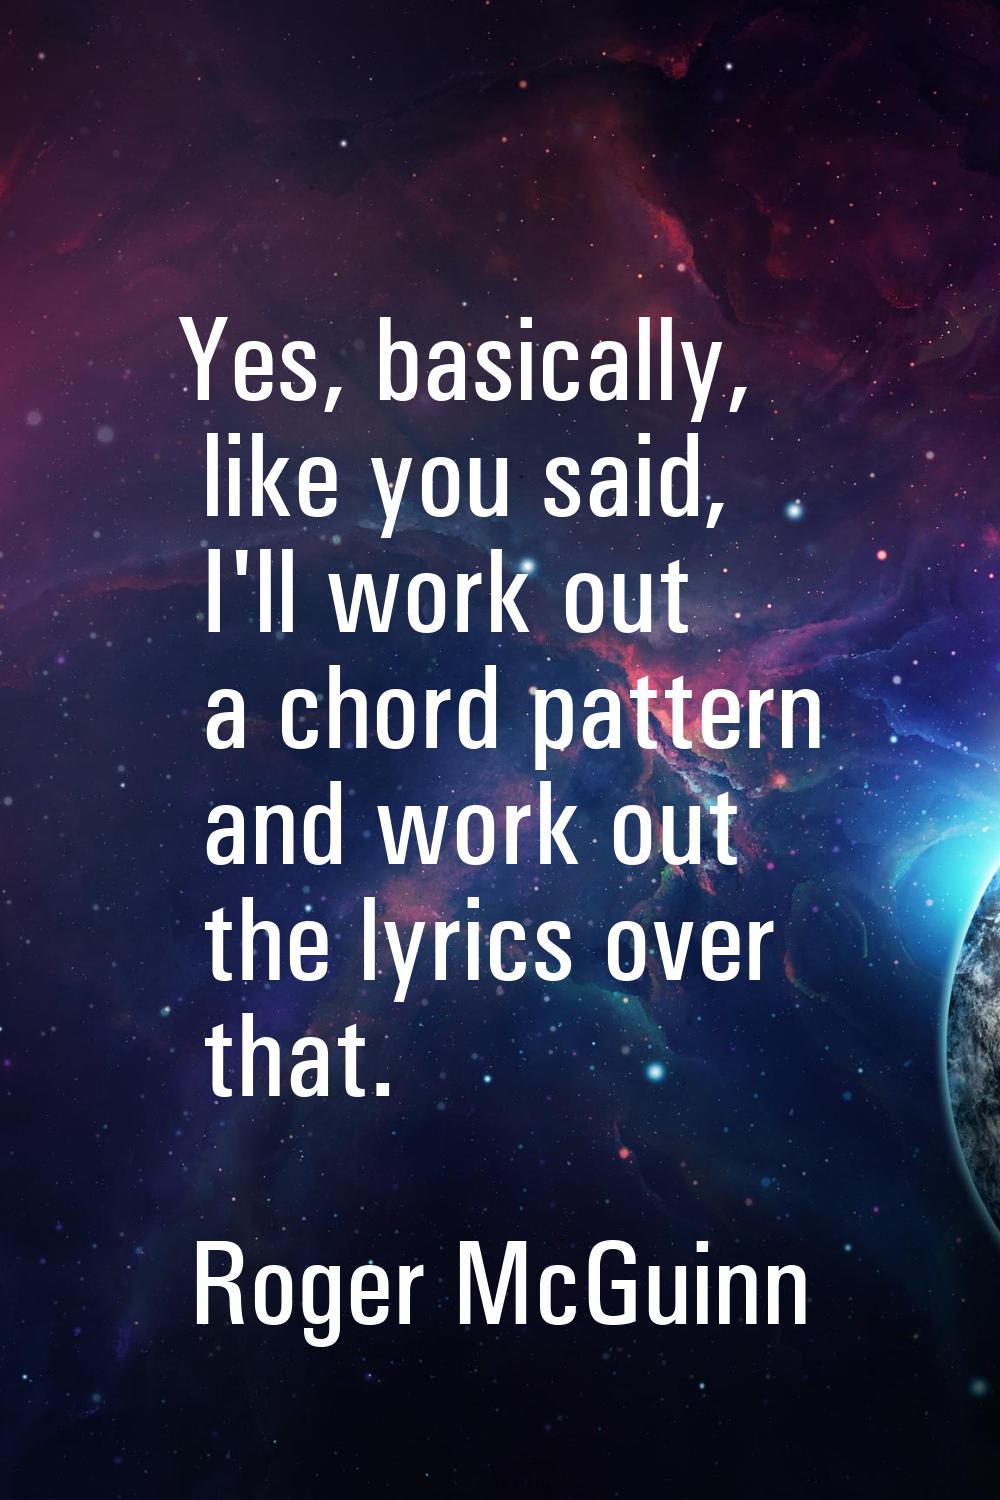 Yes, basically, like you said, I'll work out a chord pattern and work out the lyrics over that.